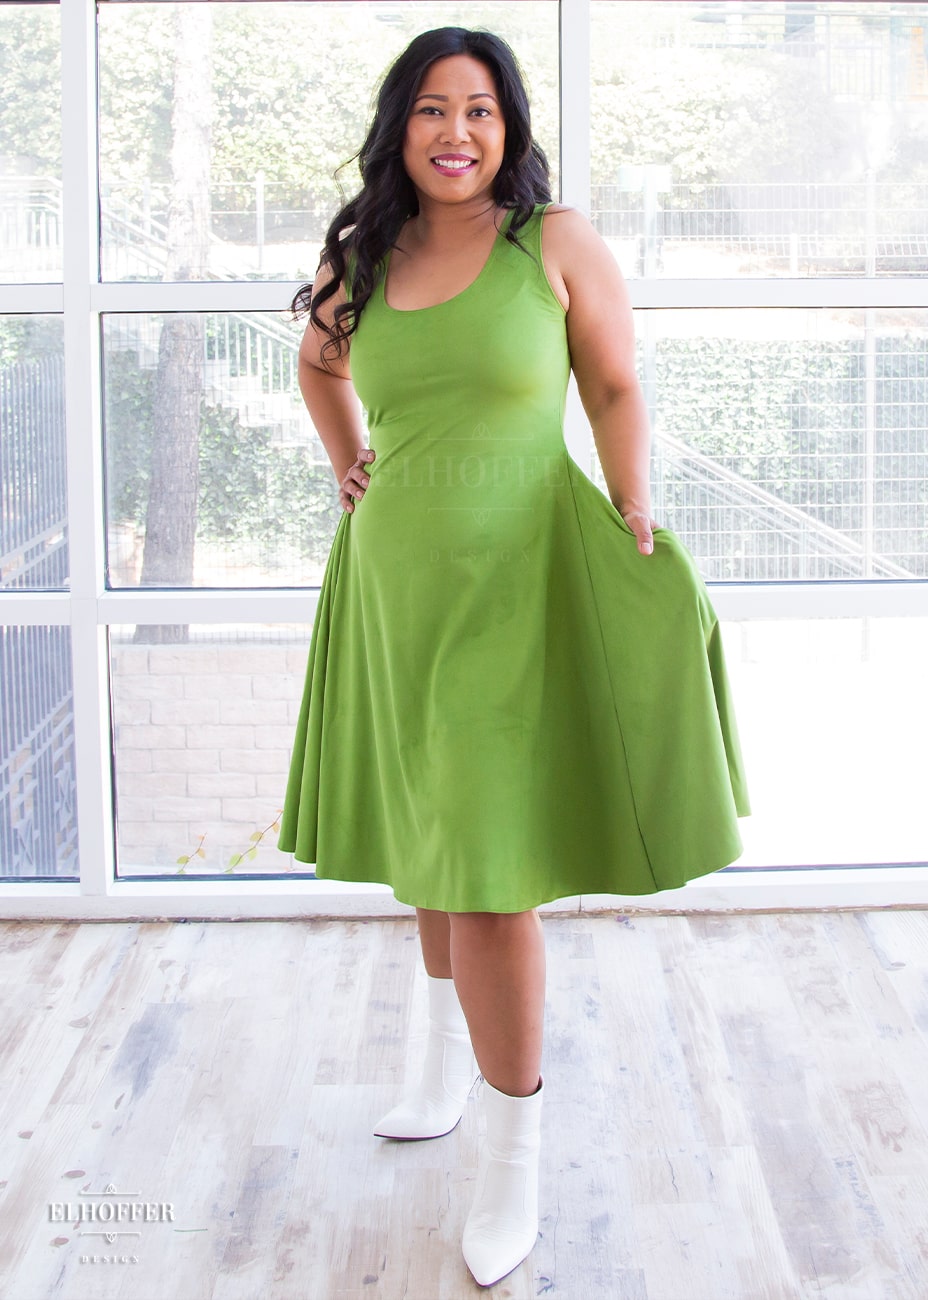 Alyssa, a medium skinned size medium model with long dark hair, wears a light green suede knee length dress with fitted torso and full skirt. She holds out one side to show off the pockets.